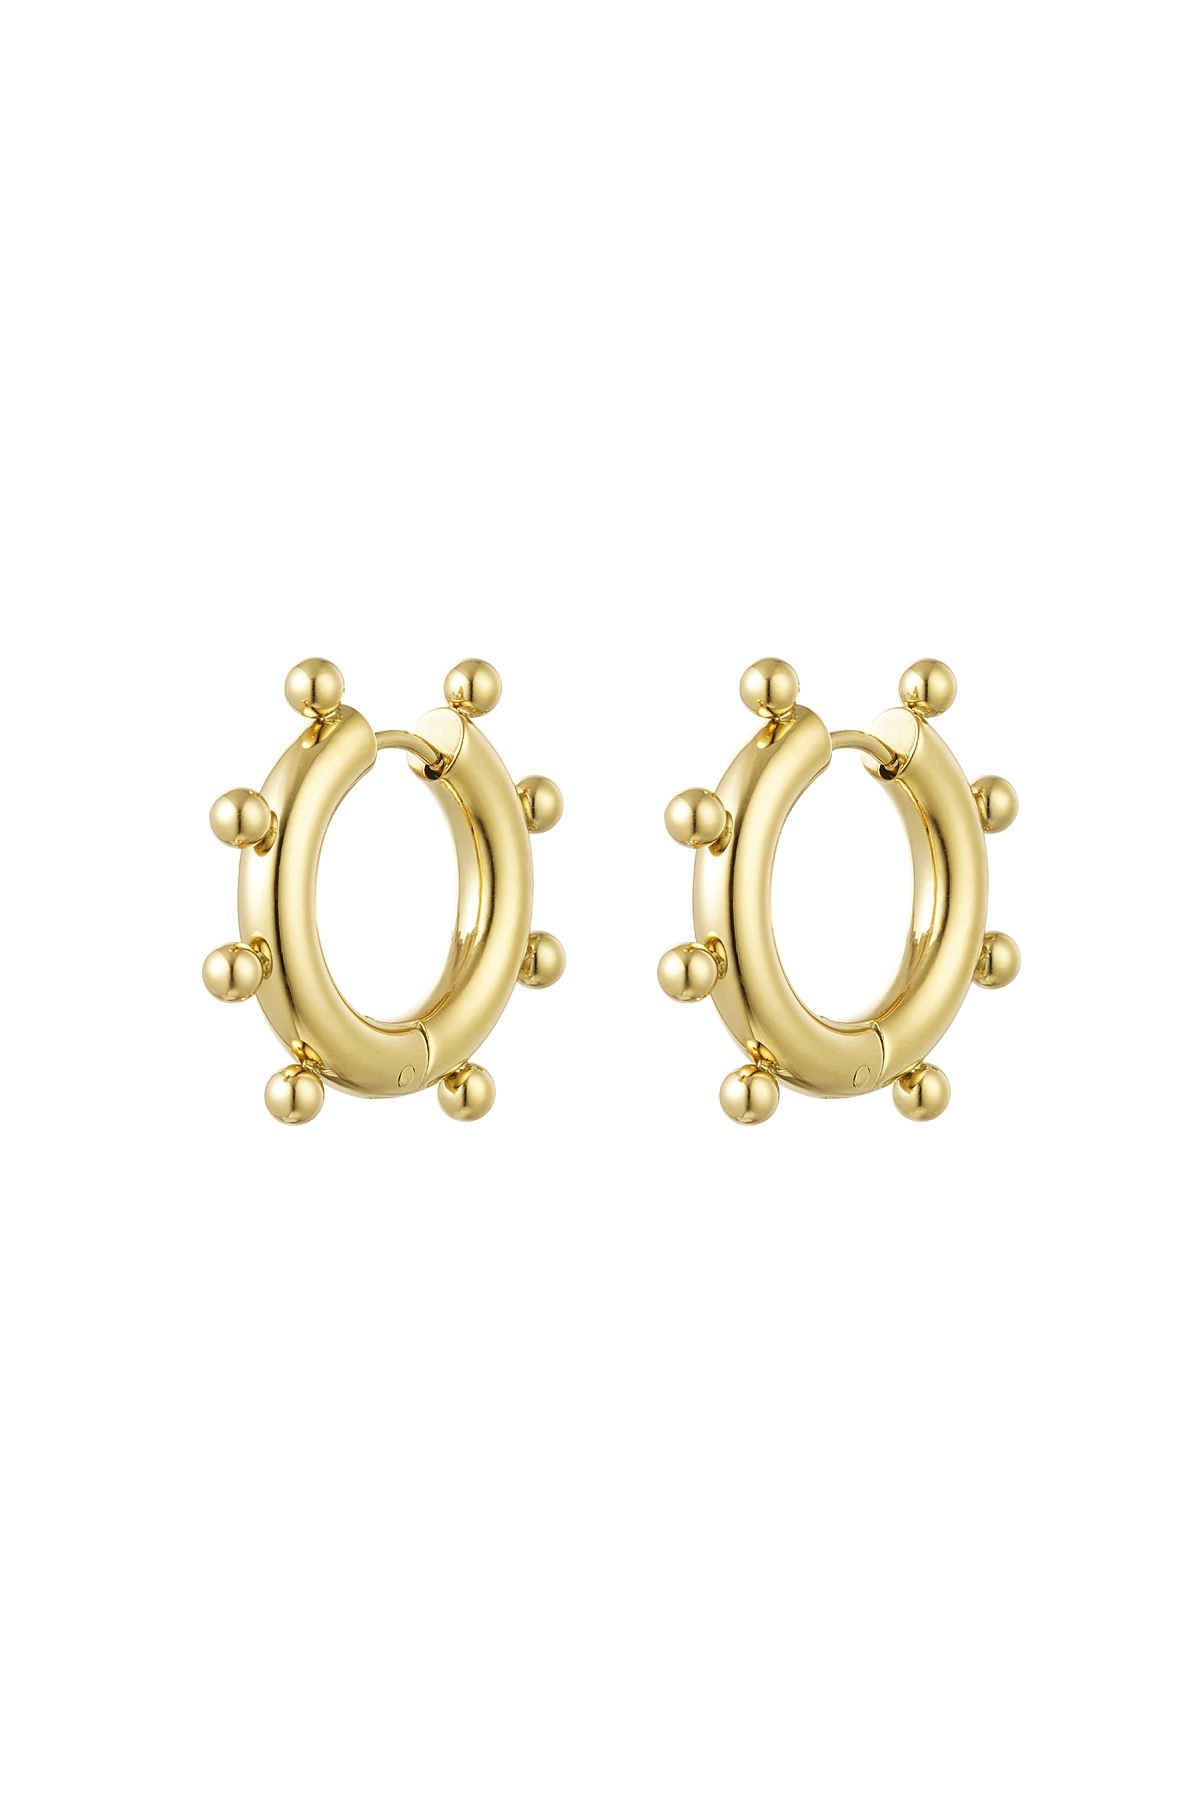 Earrings round balls large - gold Stainless Steel